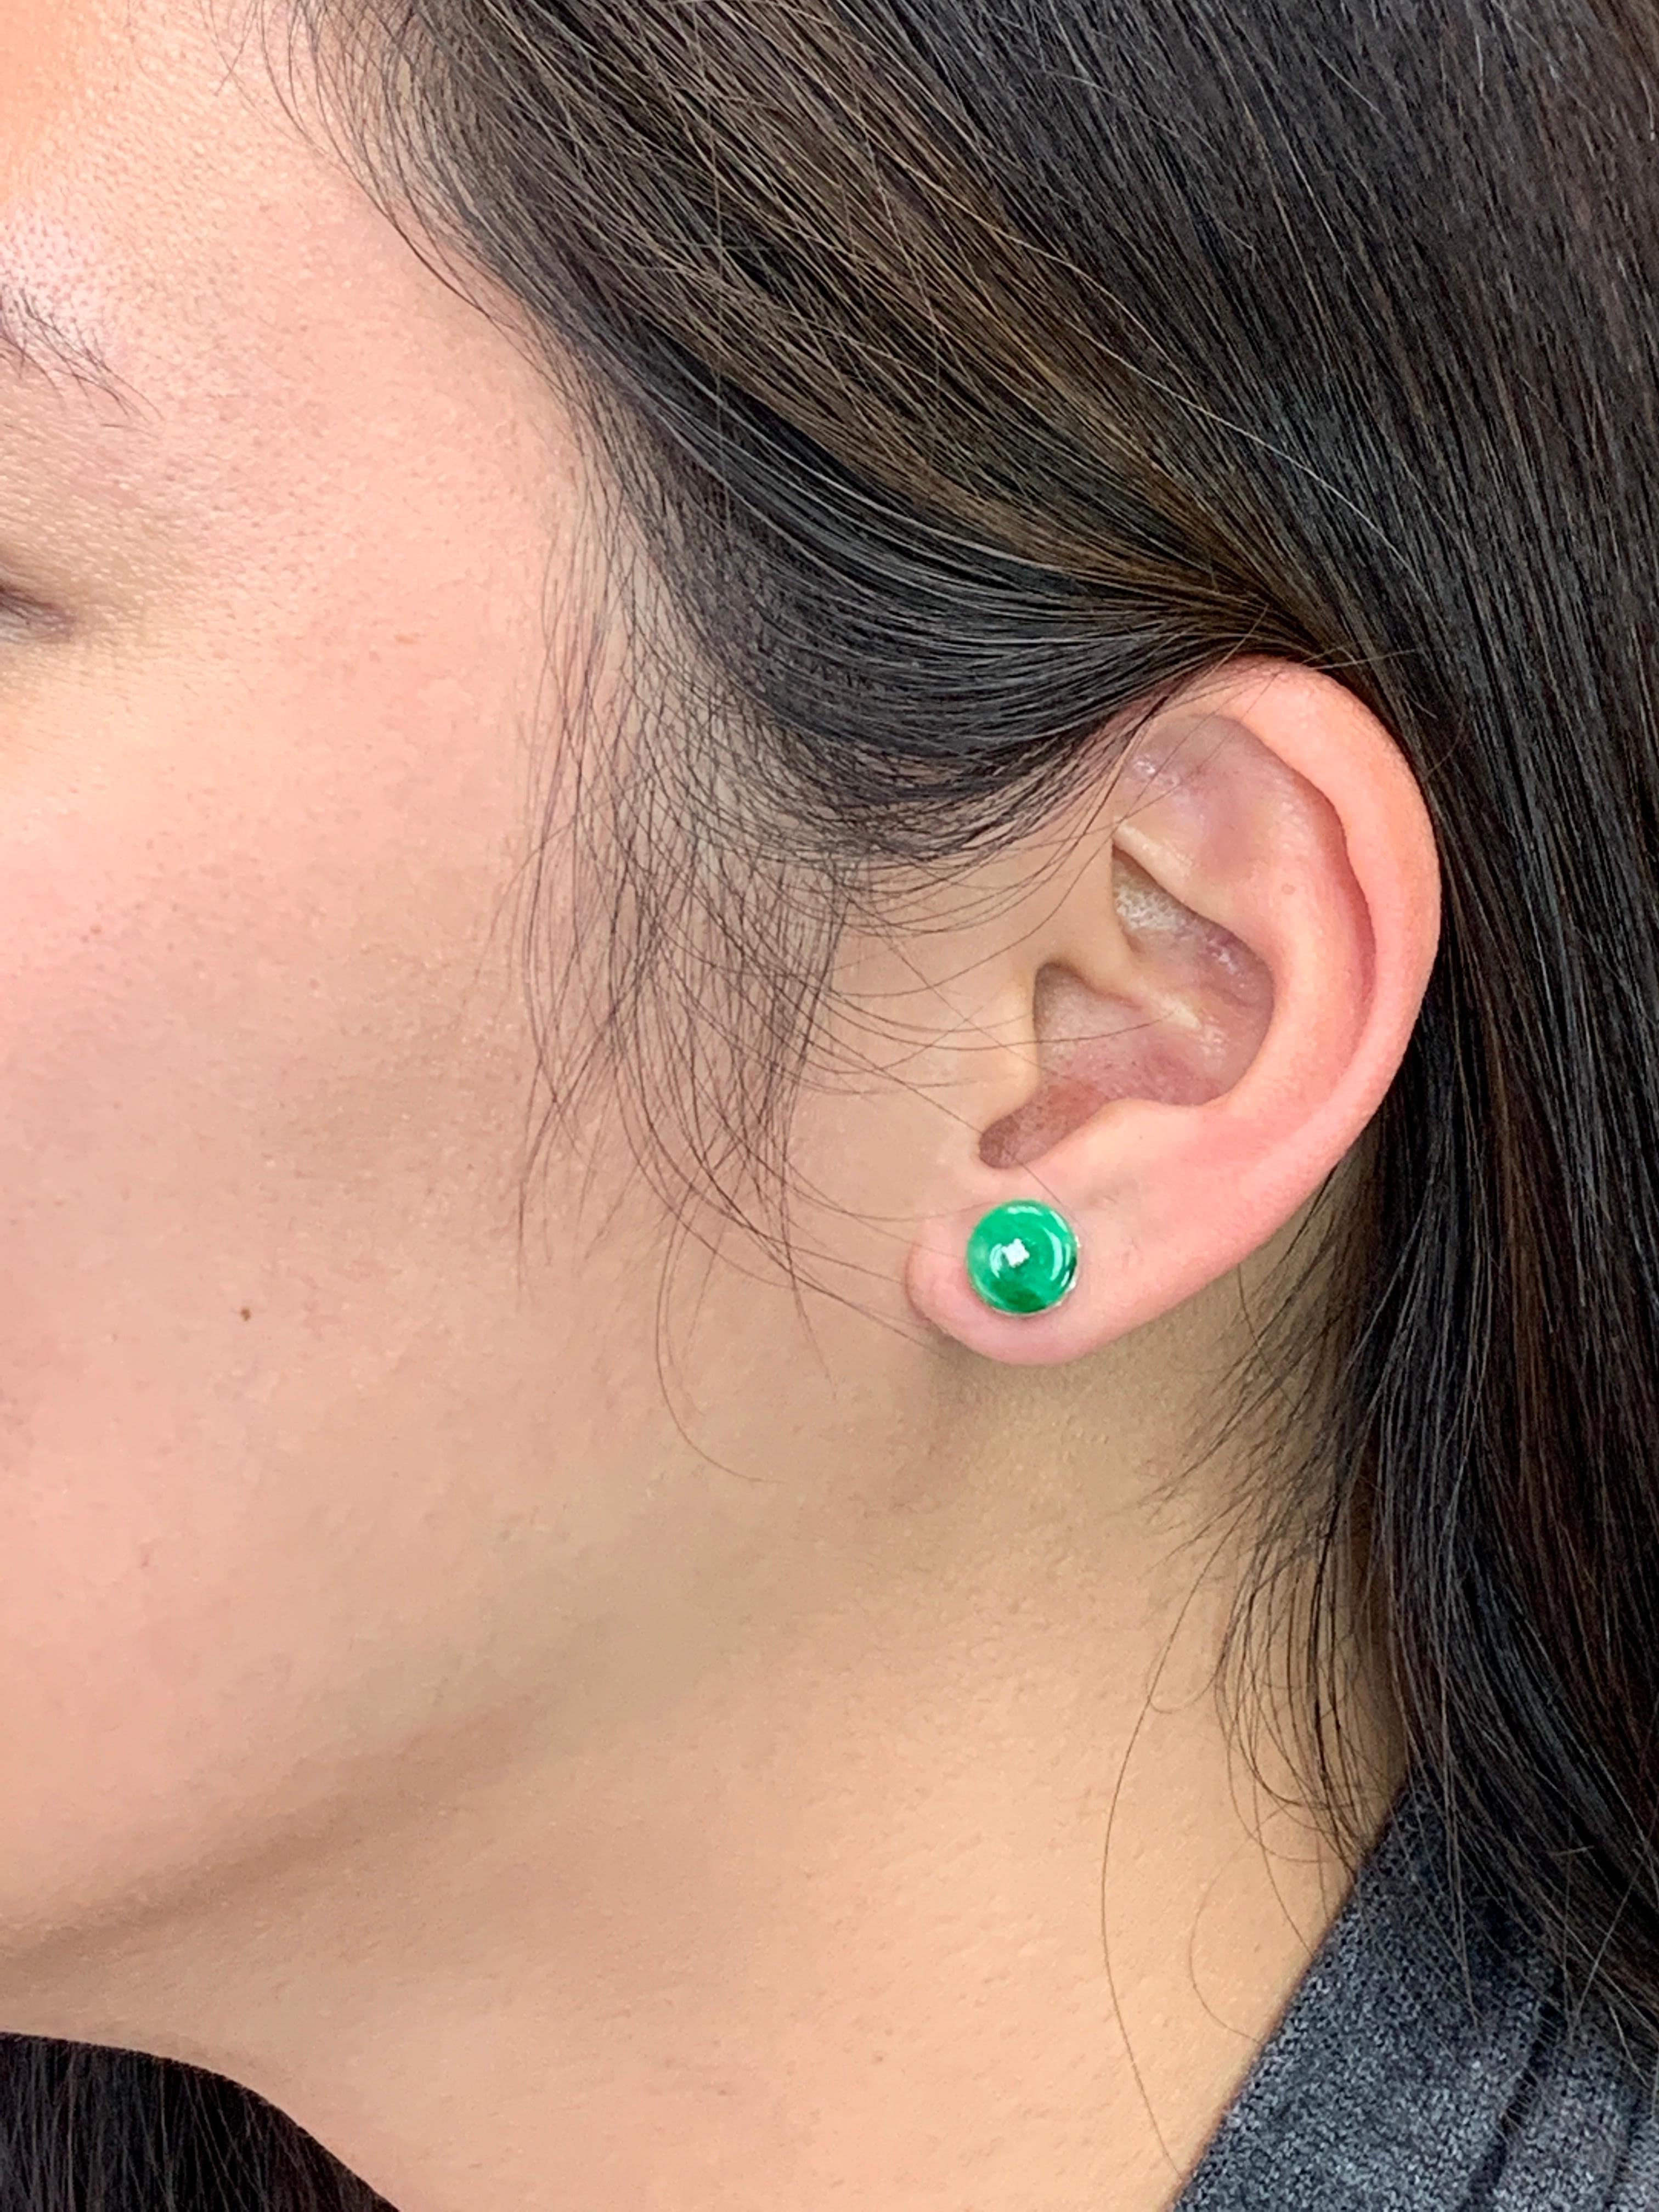 This is a pair of spinach green Jade earrings. It is made recently using old jade material. The diameter is about 9.1 mm each. The earrings are set in 18k white gold and diamonds. There is one single diamond in the middle of each earring. The